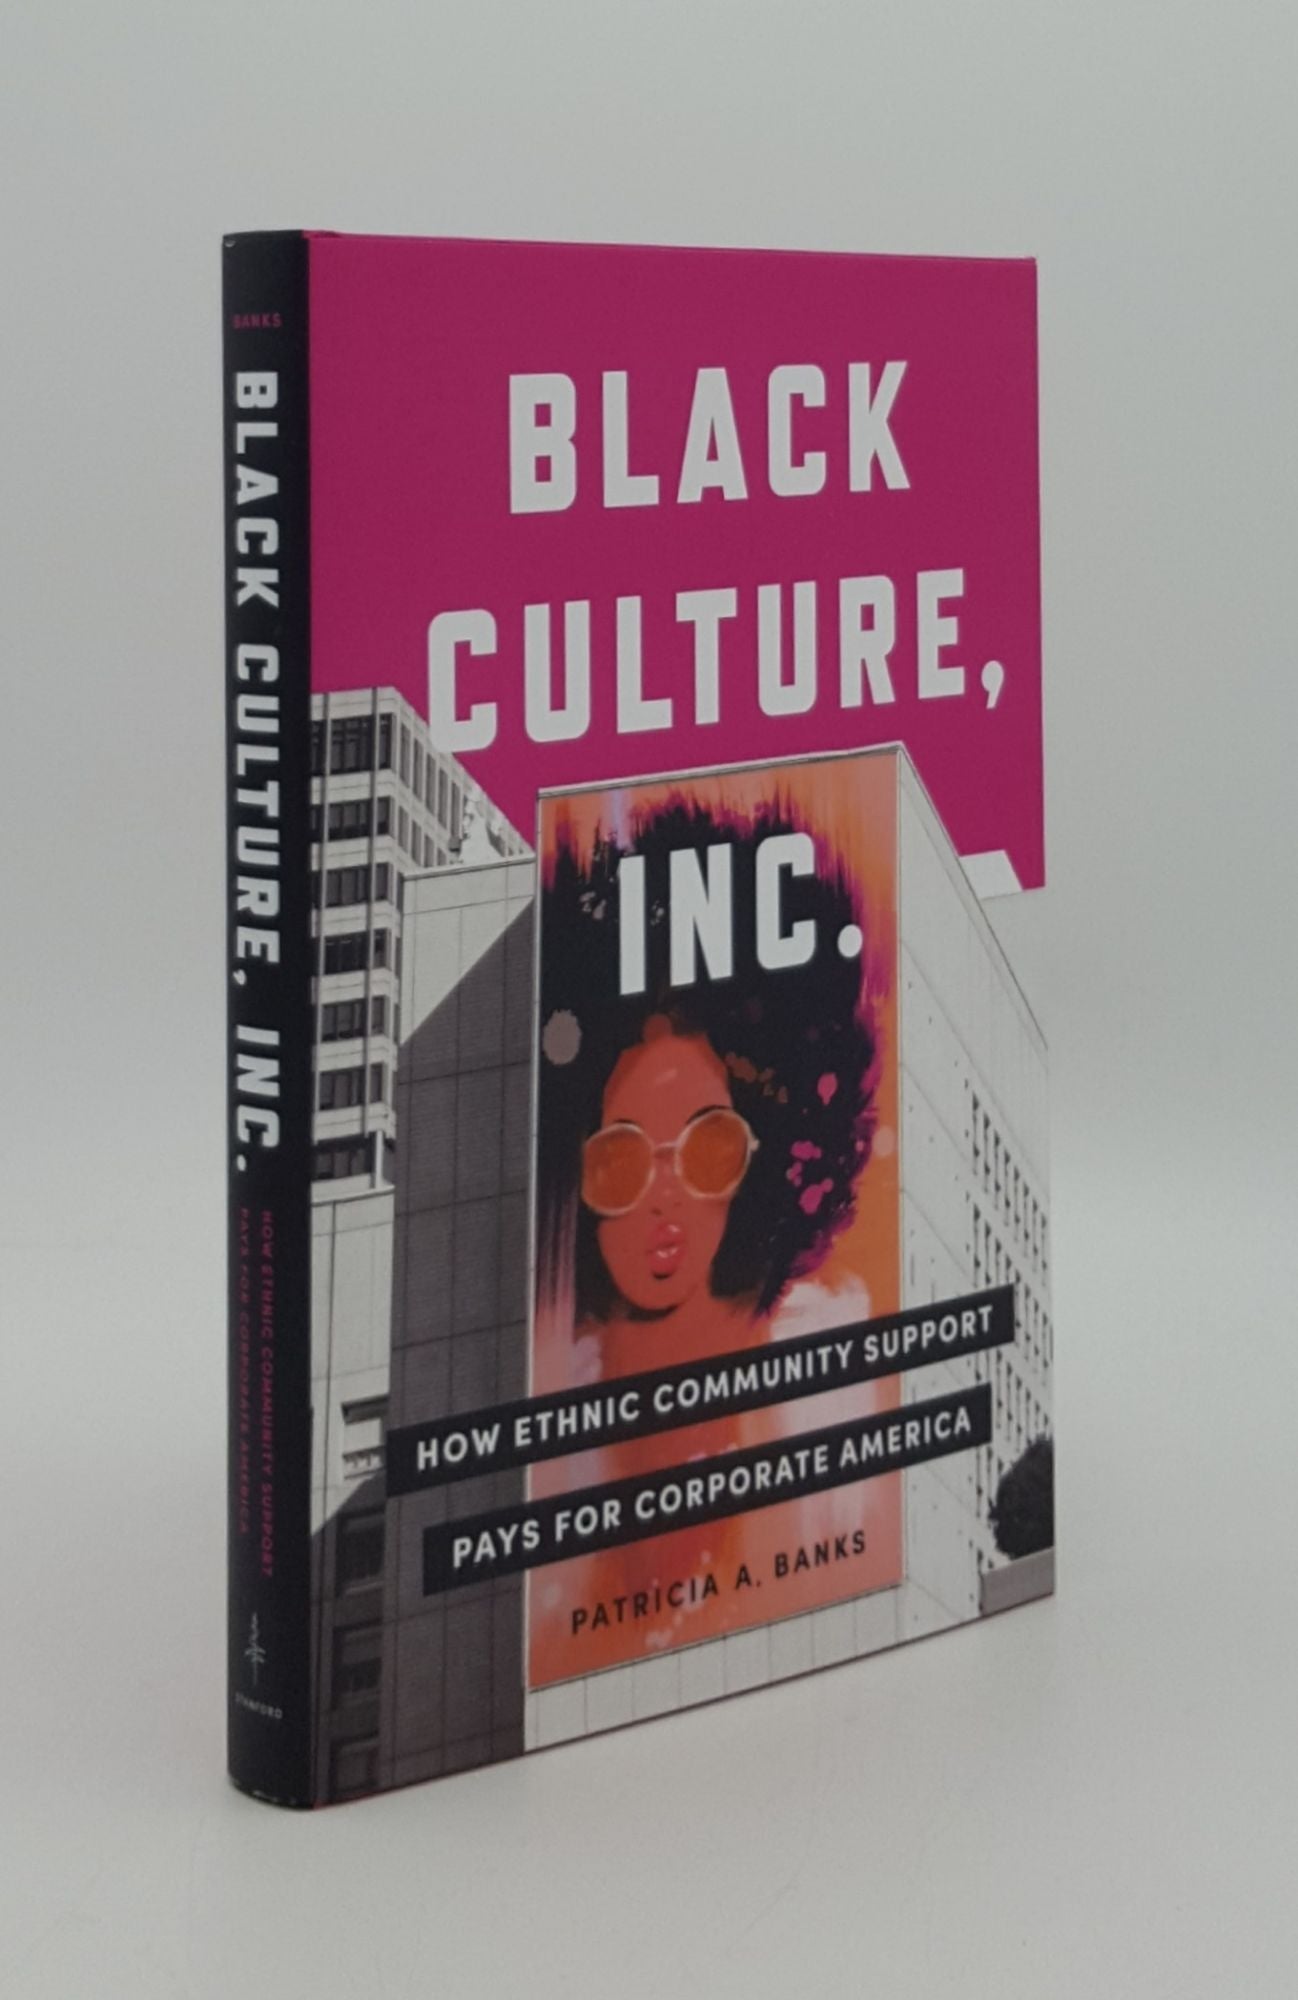 BANKS Patricia A. - Black Culture Inc How Ethnic Community Support Pays for Corporate America (Culture and Economic Life)